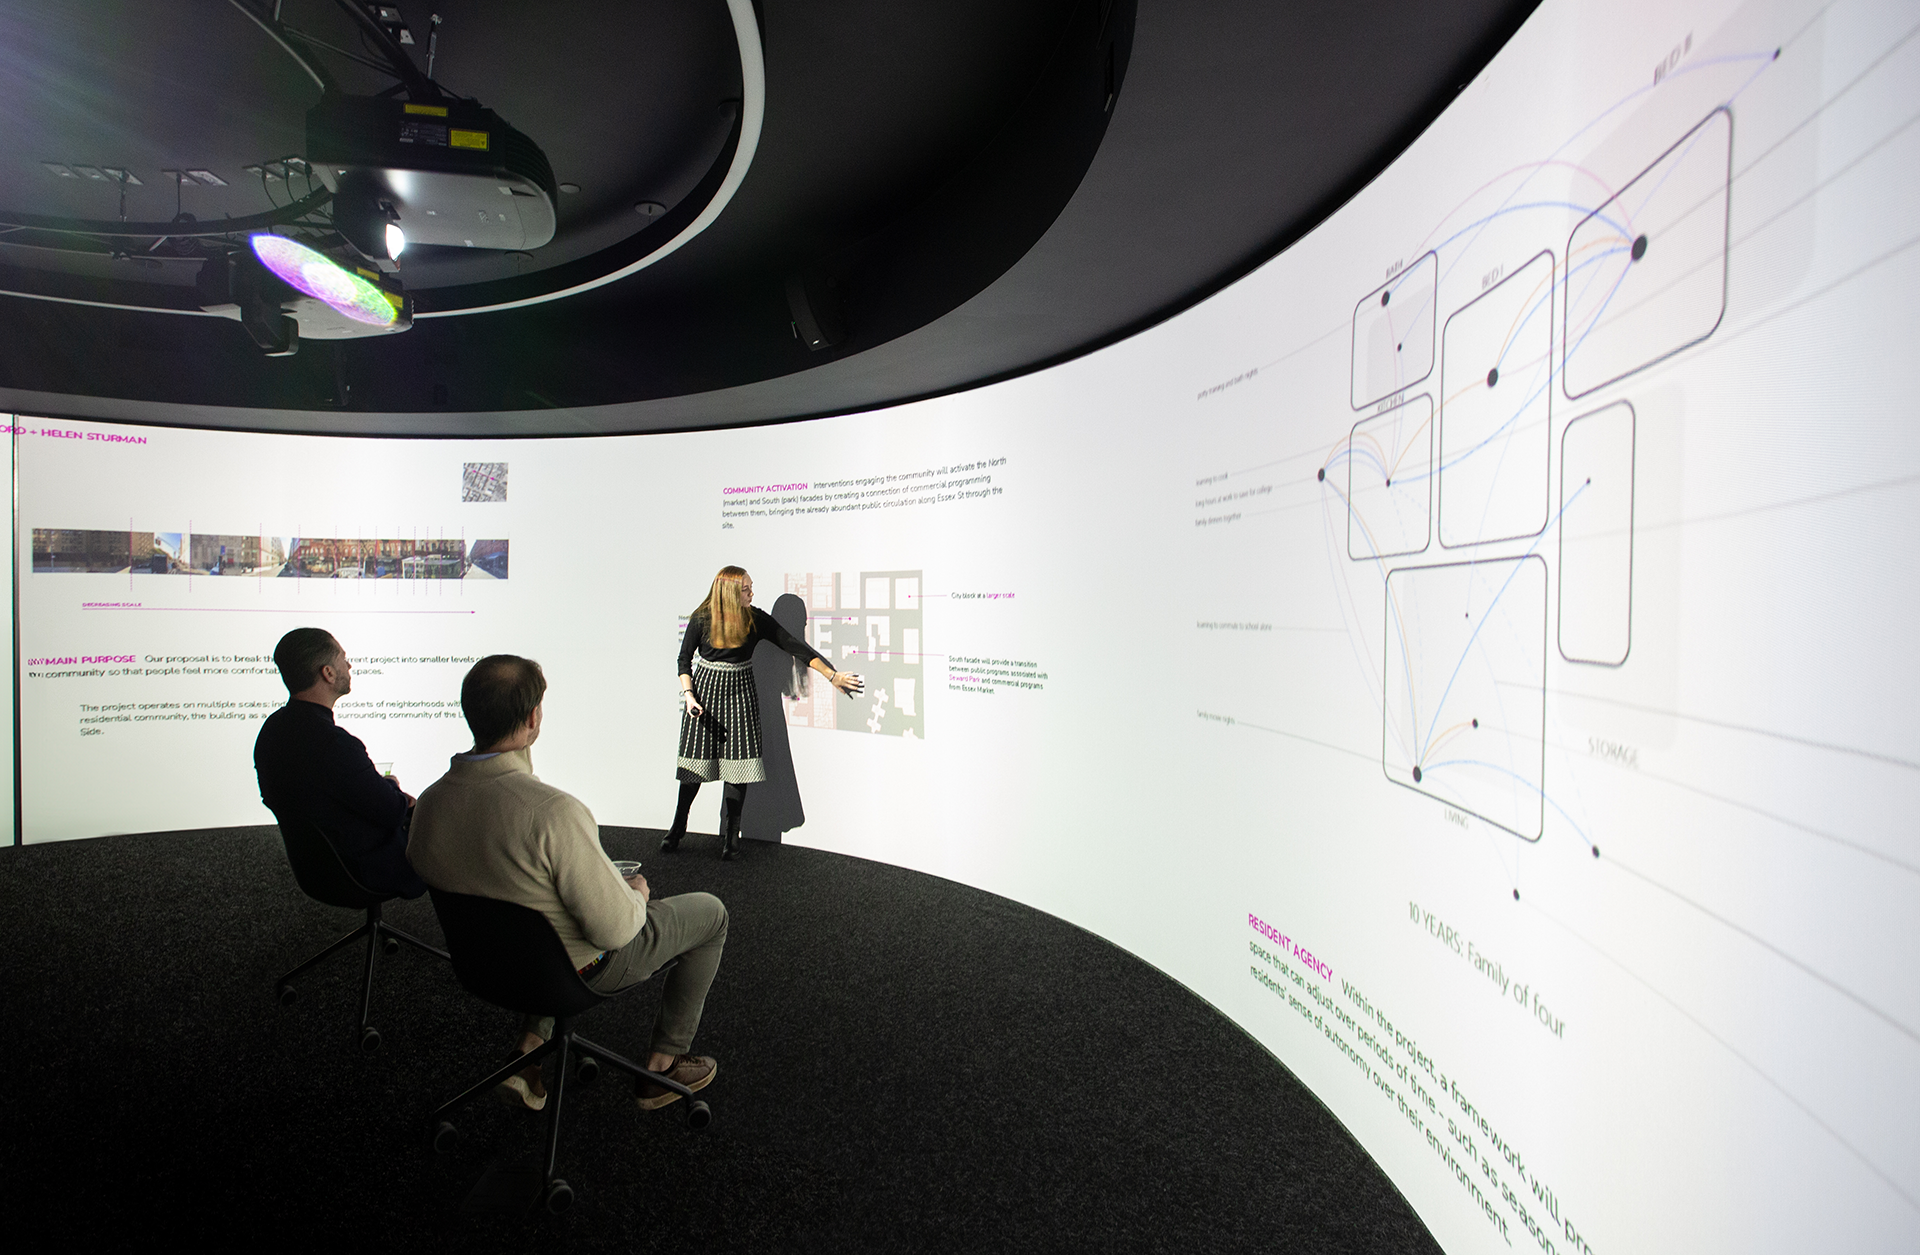 Student giving a presentation to two people in front of a large digital projection.